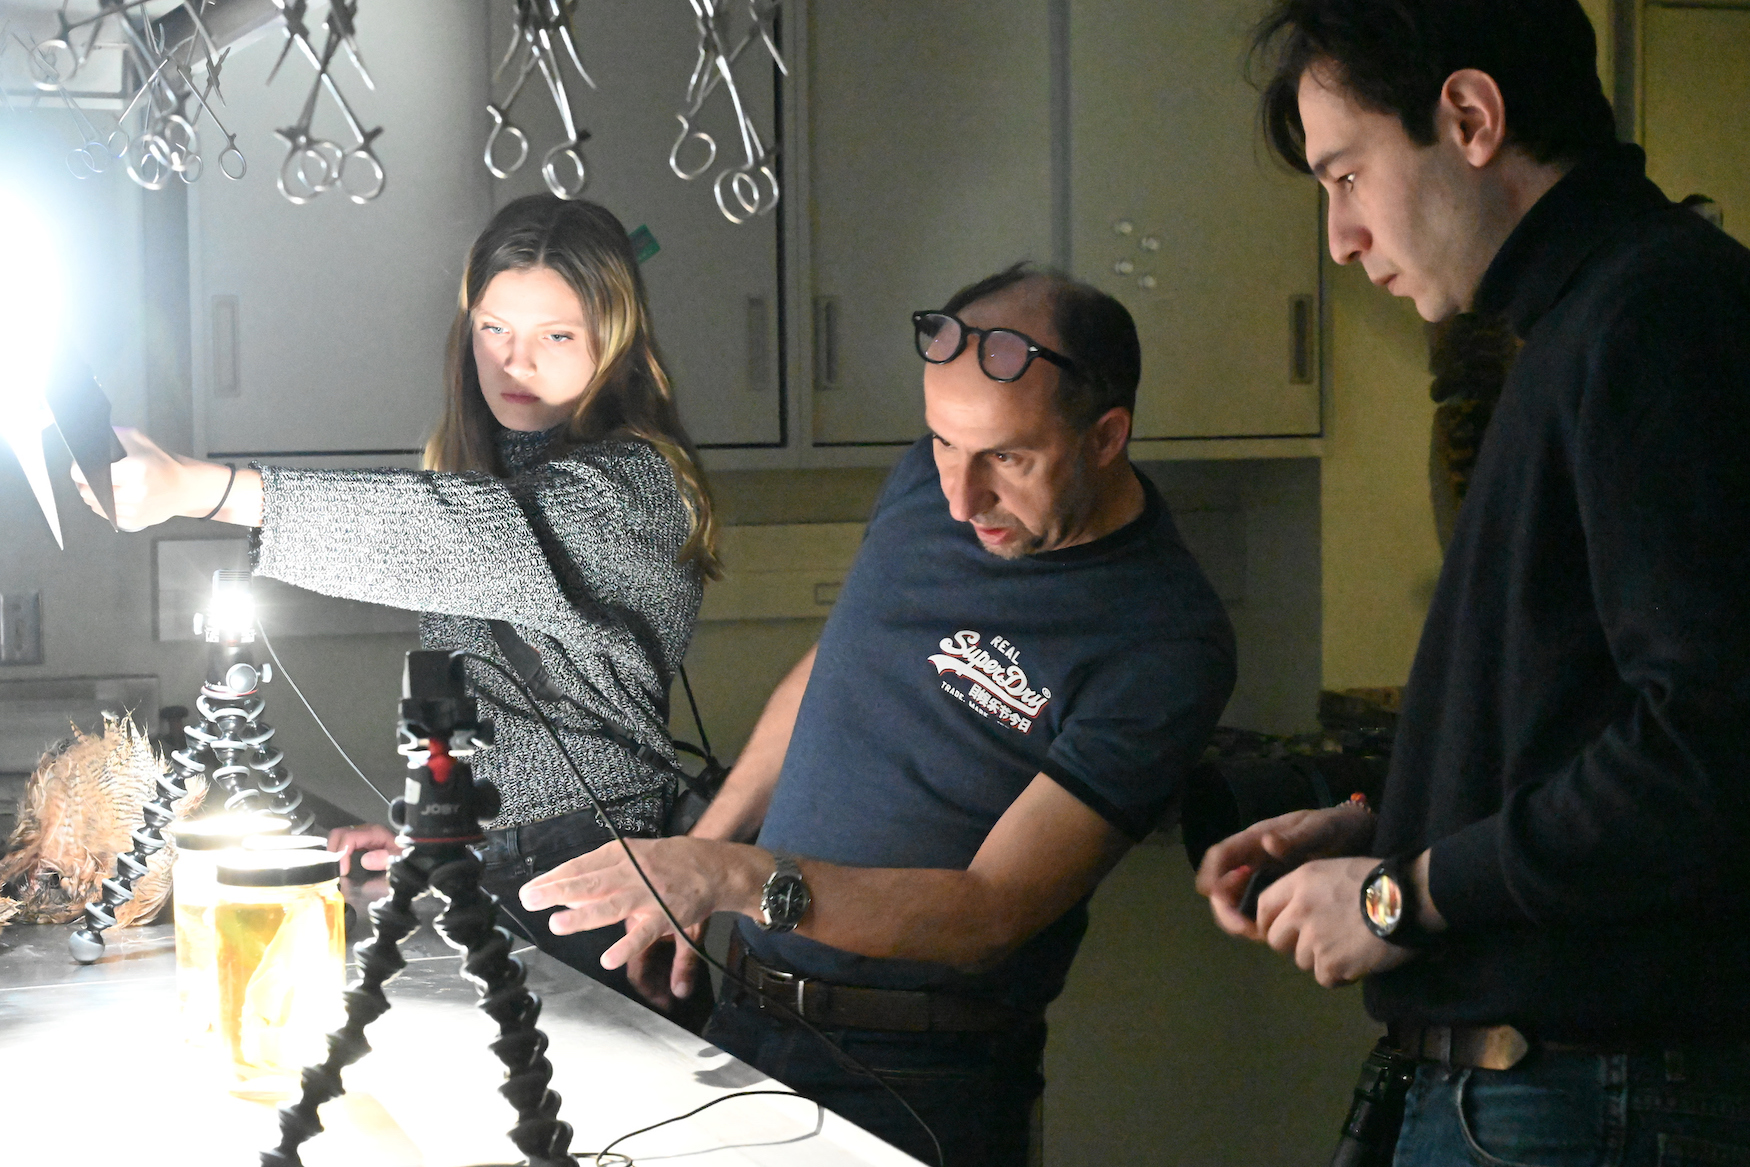 Madeleine Hordinski helps photographer Paolo Verzone and his assistant Massimo Nicolaci set up lighting for a photograph